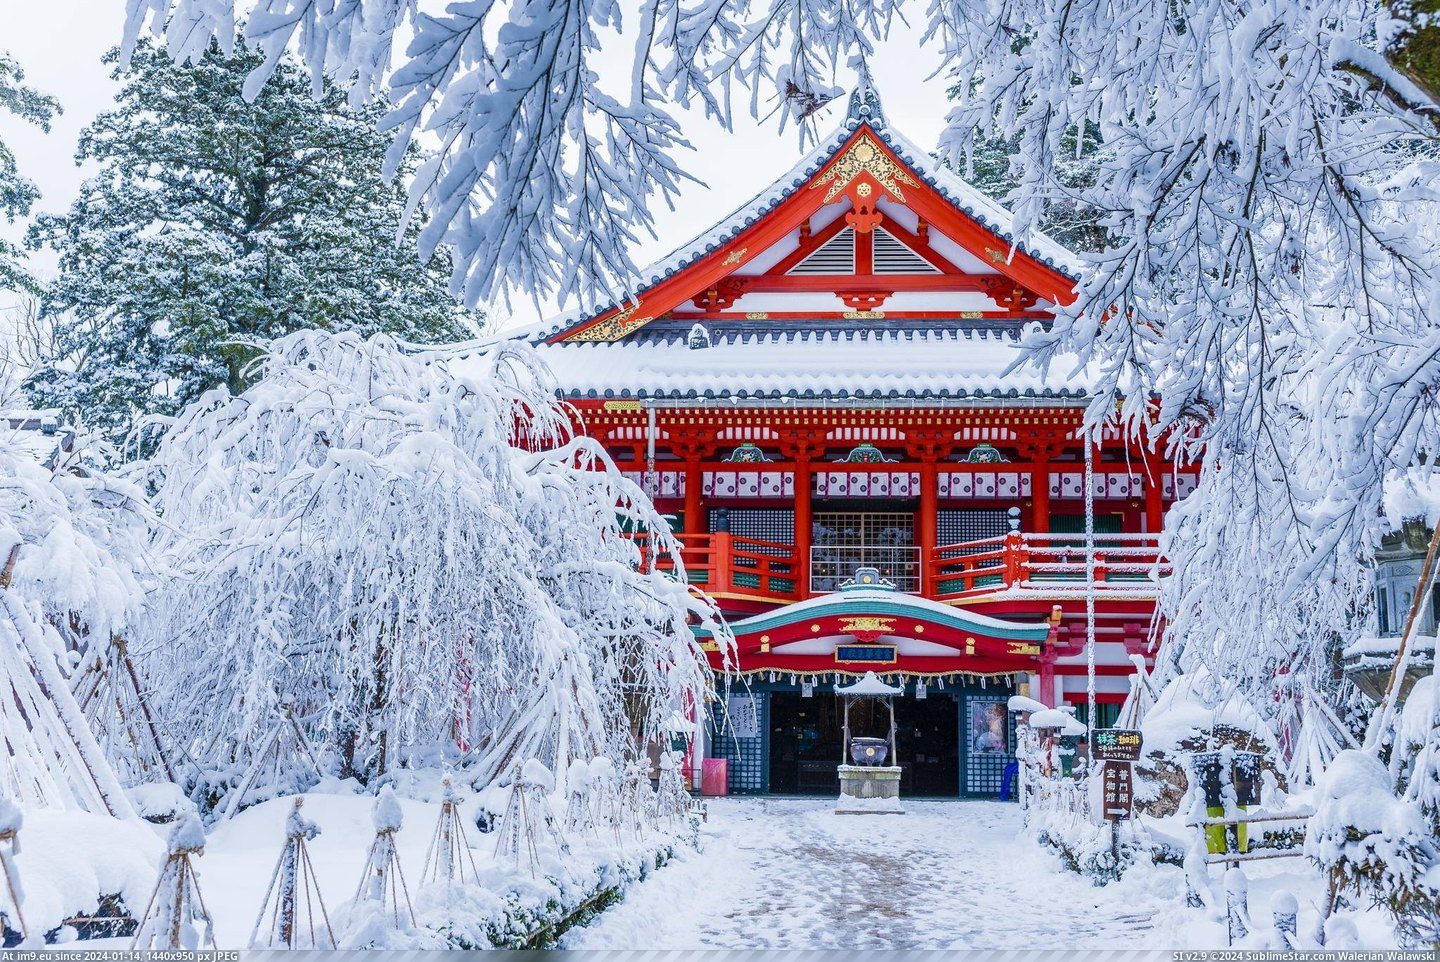 #Japanese #Temple #Snow [Pics] Japanese temple in the snow Pic. (Image of album My r/PICS favs))